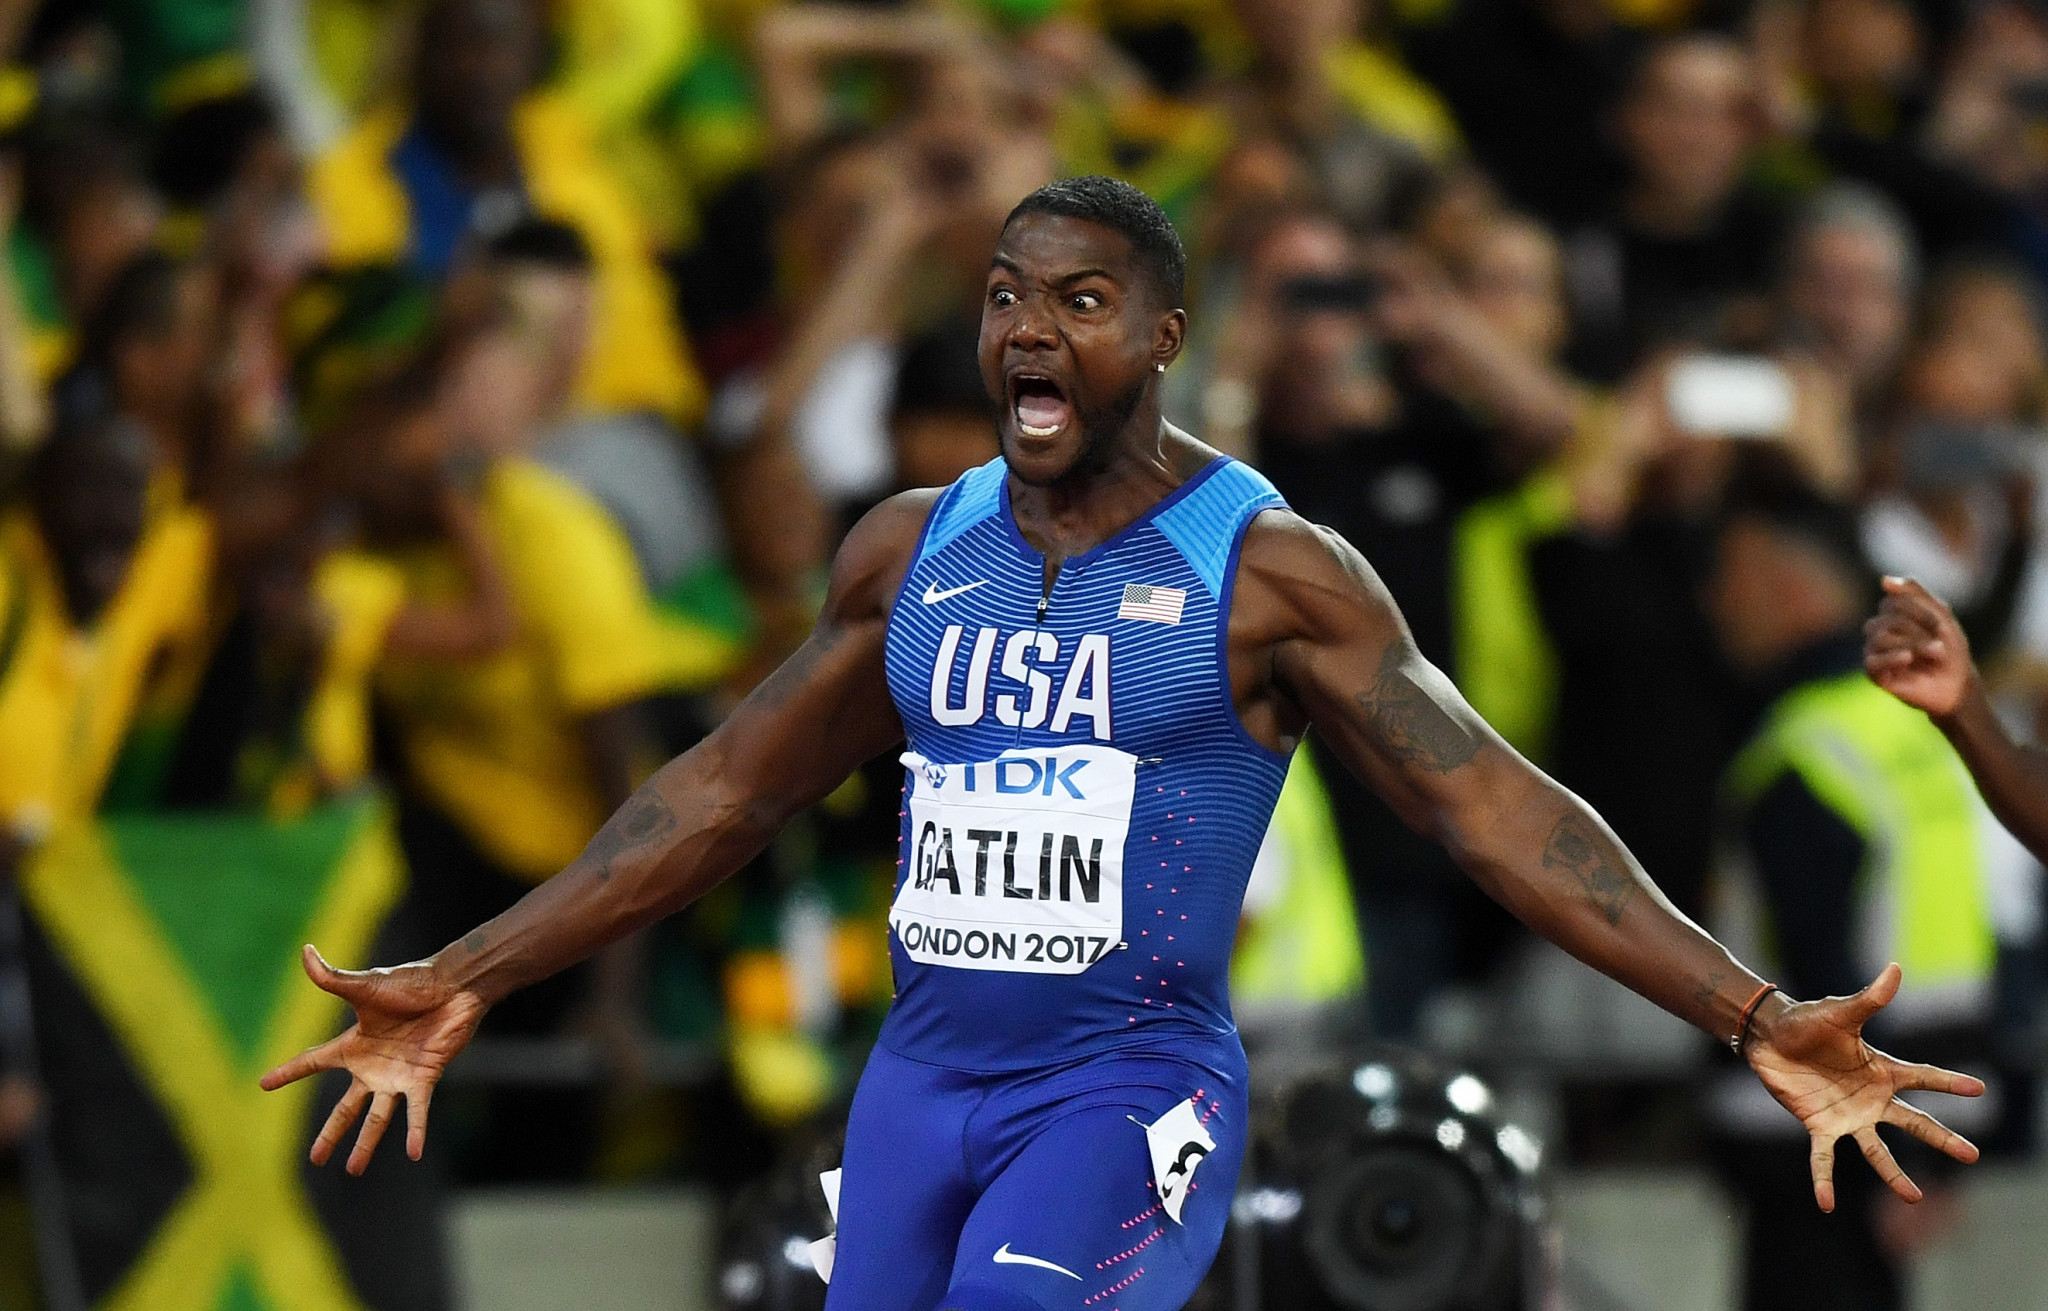 Justin Gatlin is among the Nike-sponsored athletes to have been embroiled in doping scandals ©Getty Images